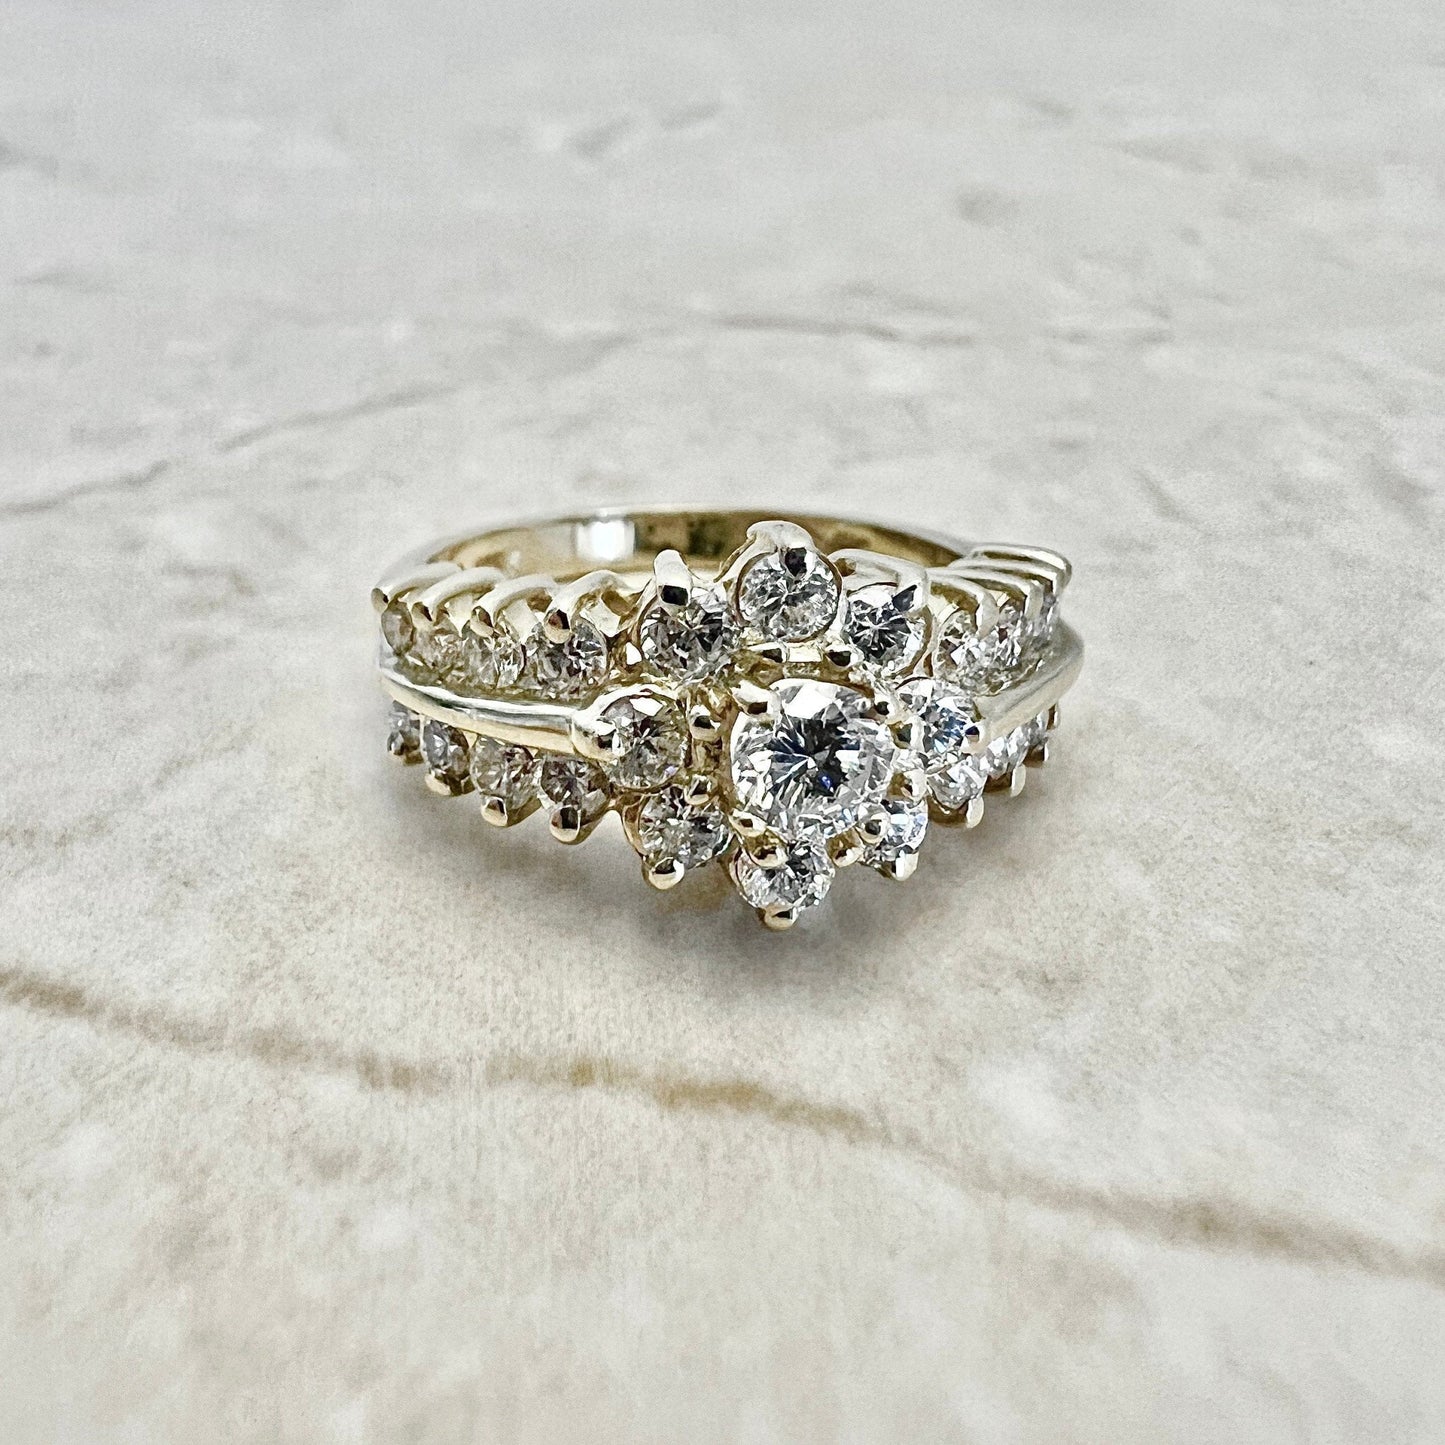 Fine 14K Diamond Halo Ring 1.05 CTTW - Yellow Gold - Diamond Cocktail Ring - Engagement Ring - Size 6.25 US - Best Birthday Gift For Her